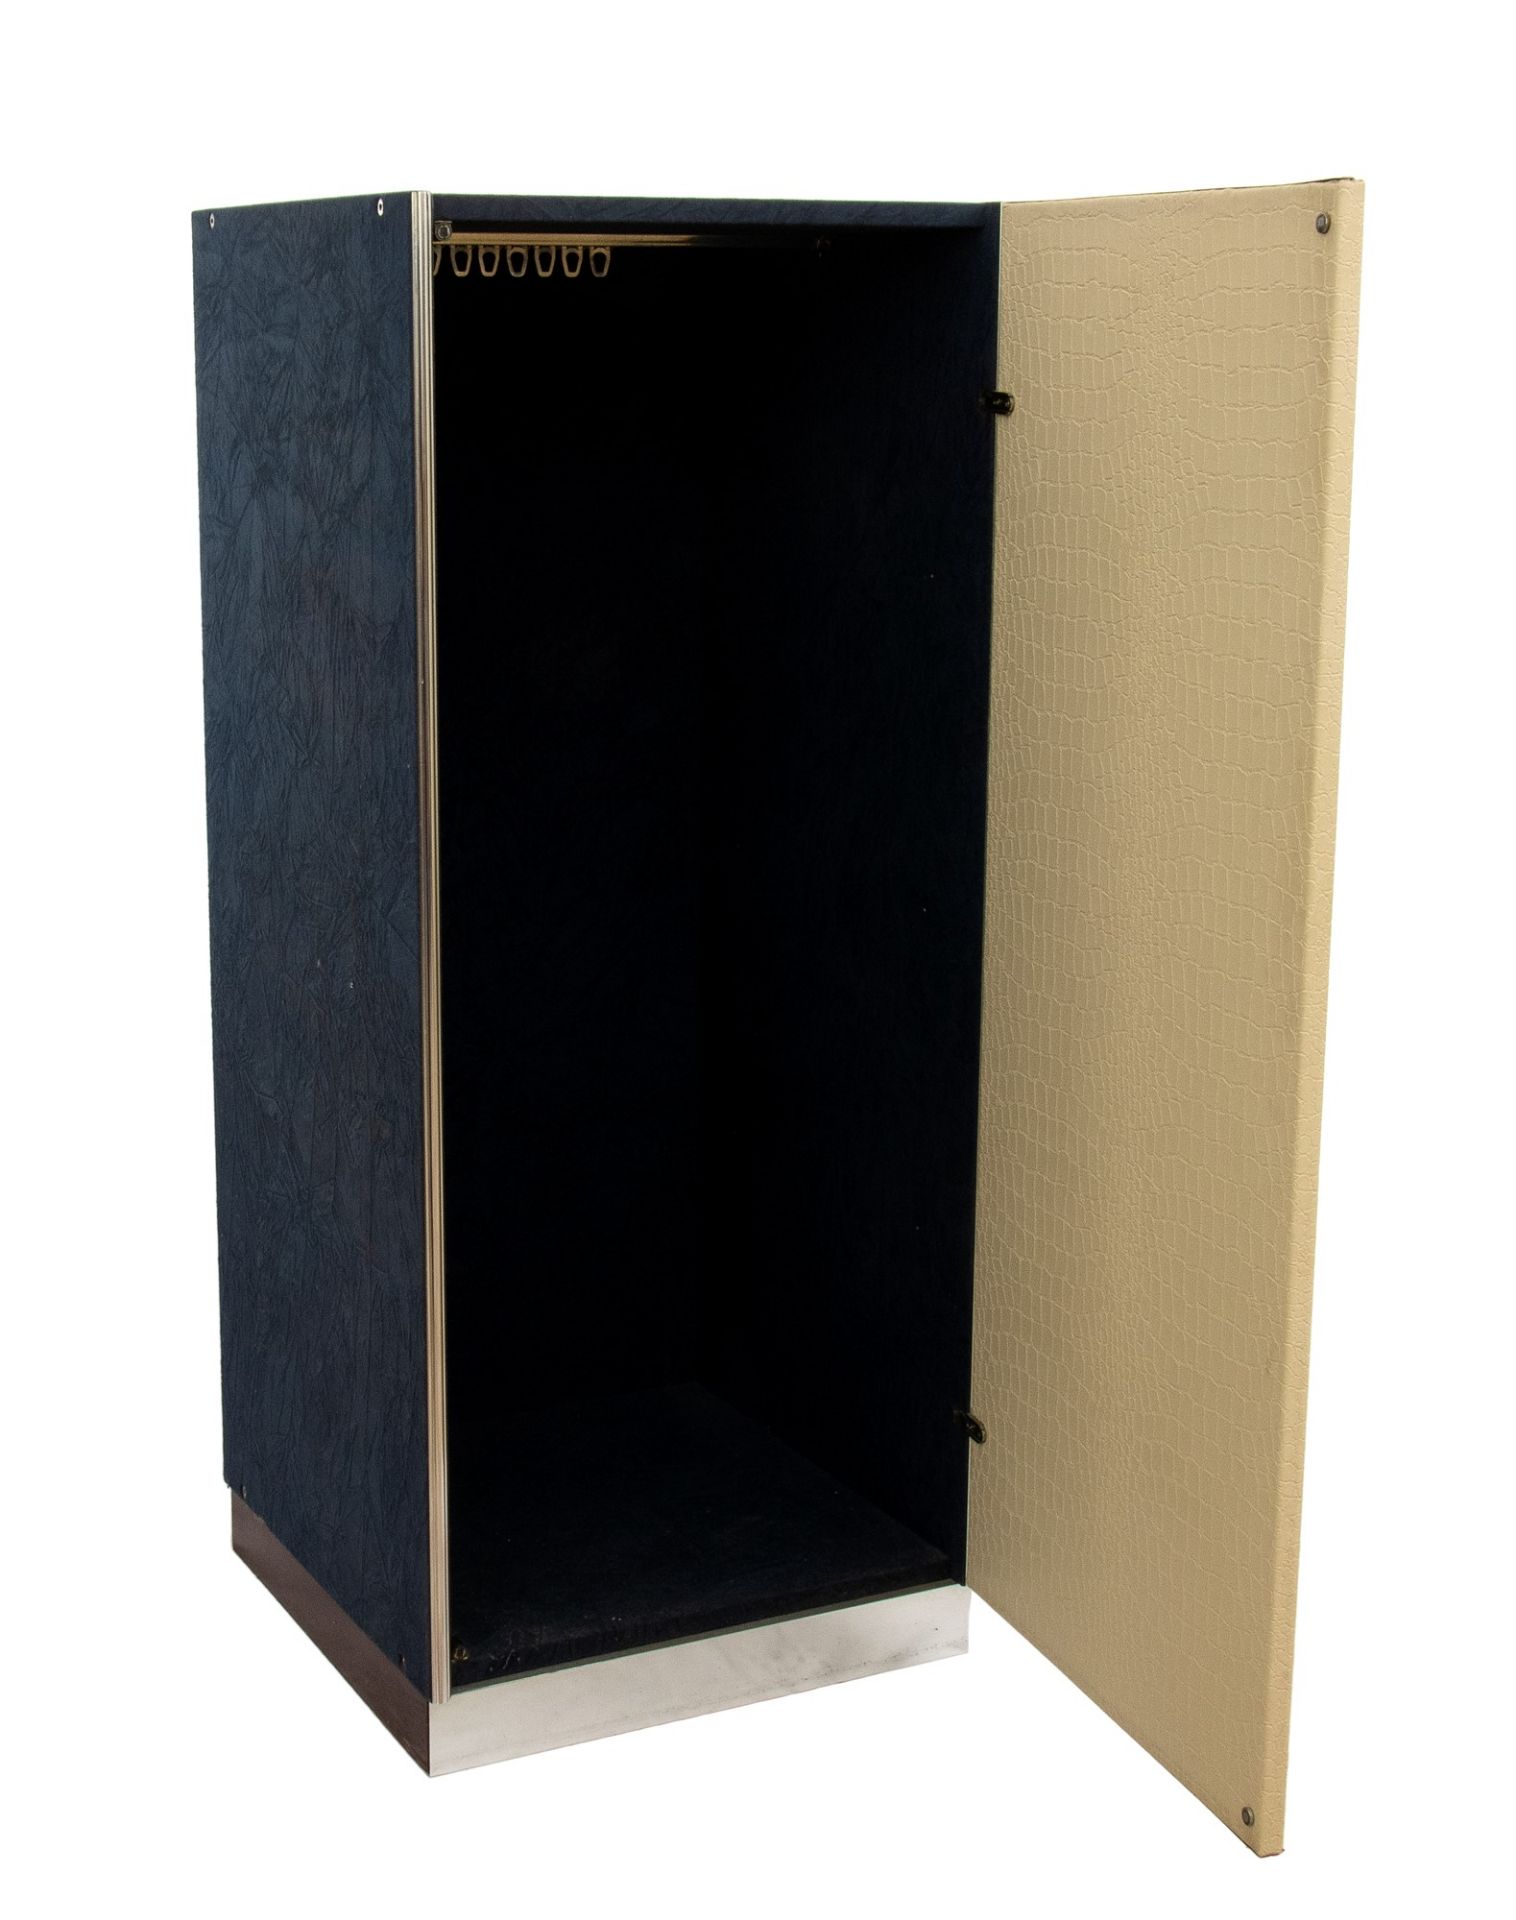 Guido Faleschini 4 modules wooden wardrobe covered in blue suede and white leather. Steel handles - Image 8 of 11